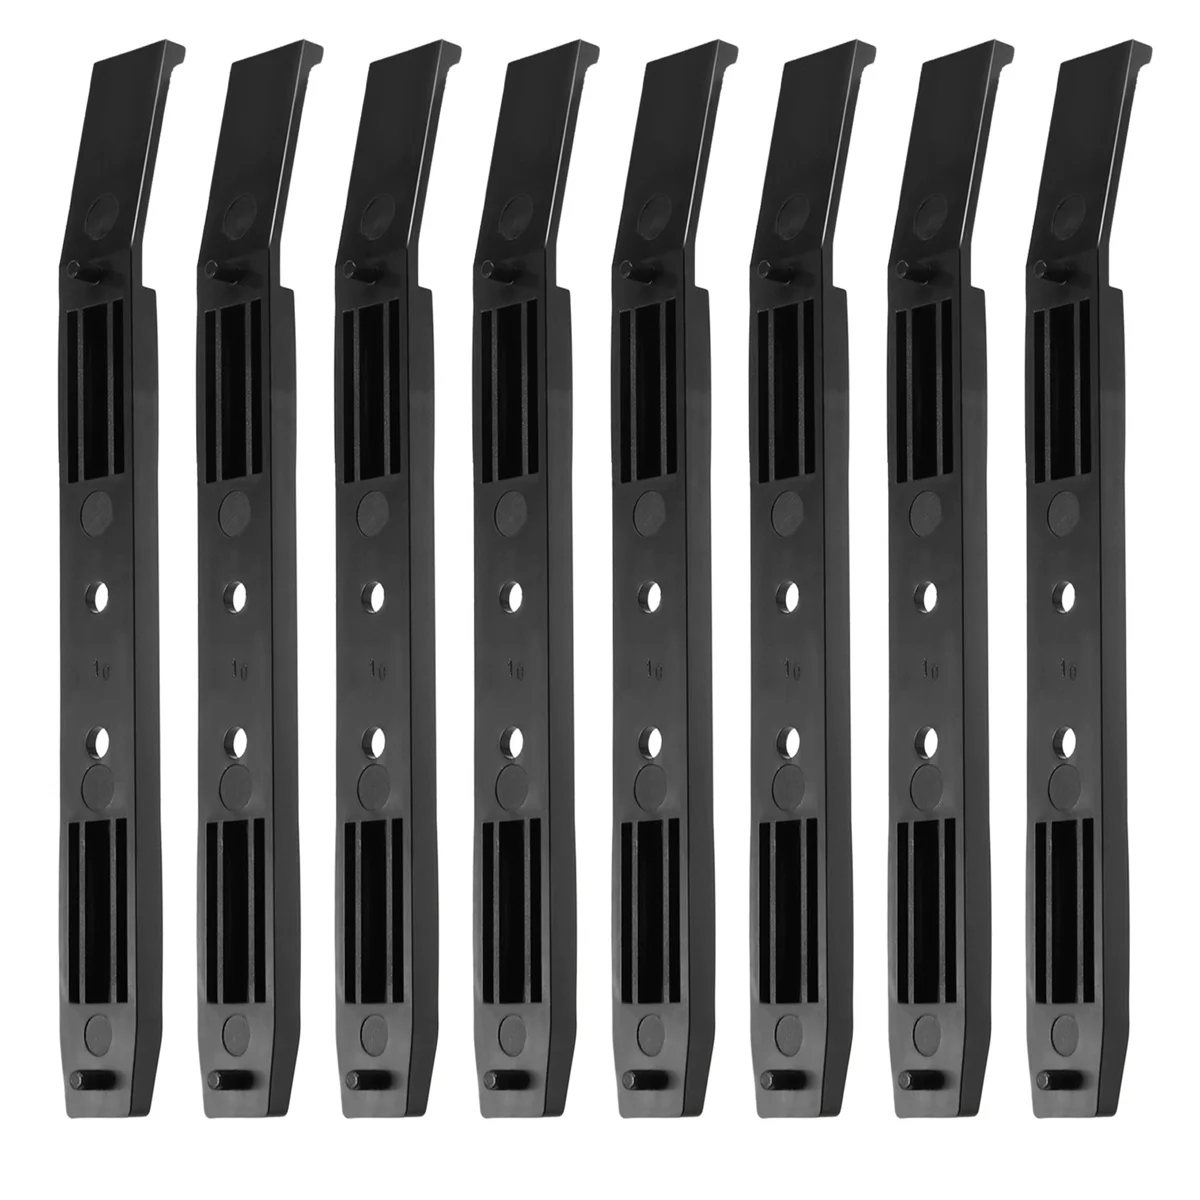 

4 Pairs Hard Drive Rails Chassis Cage Accessories Drive Bay Slider Plastic Rails for 3.5 to 5.25 Hard Drive Tray Caddy